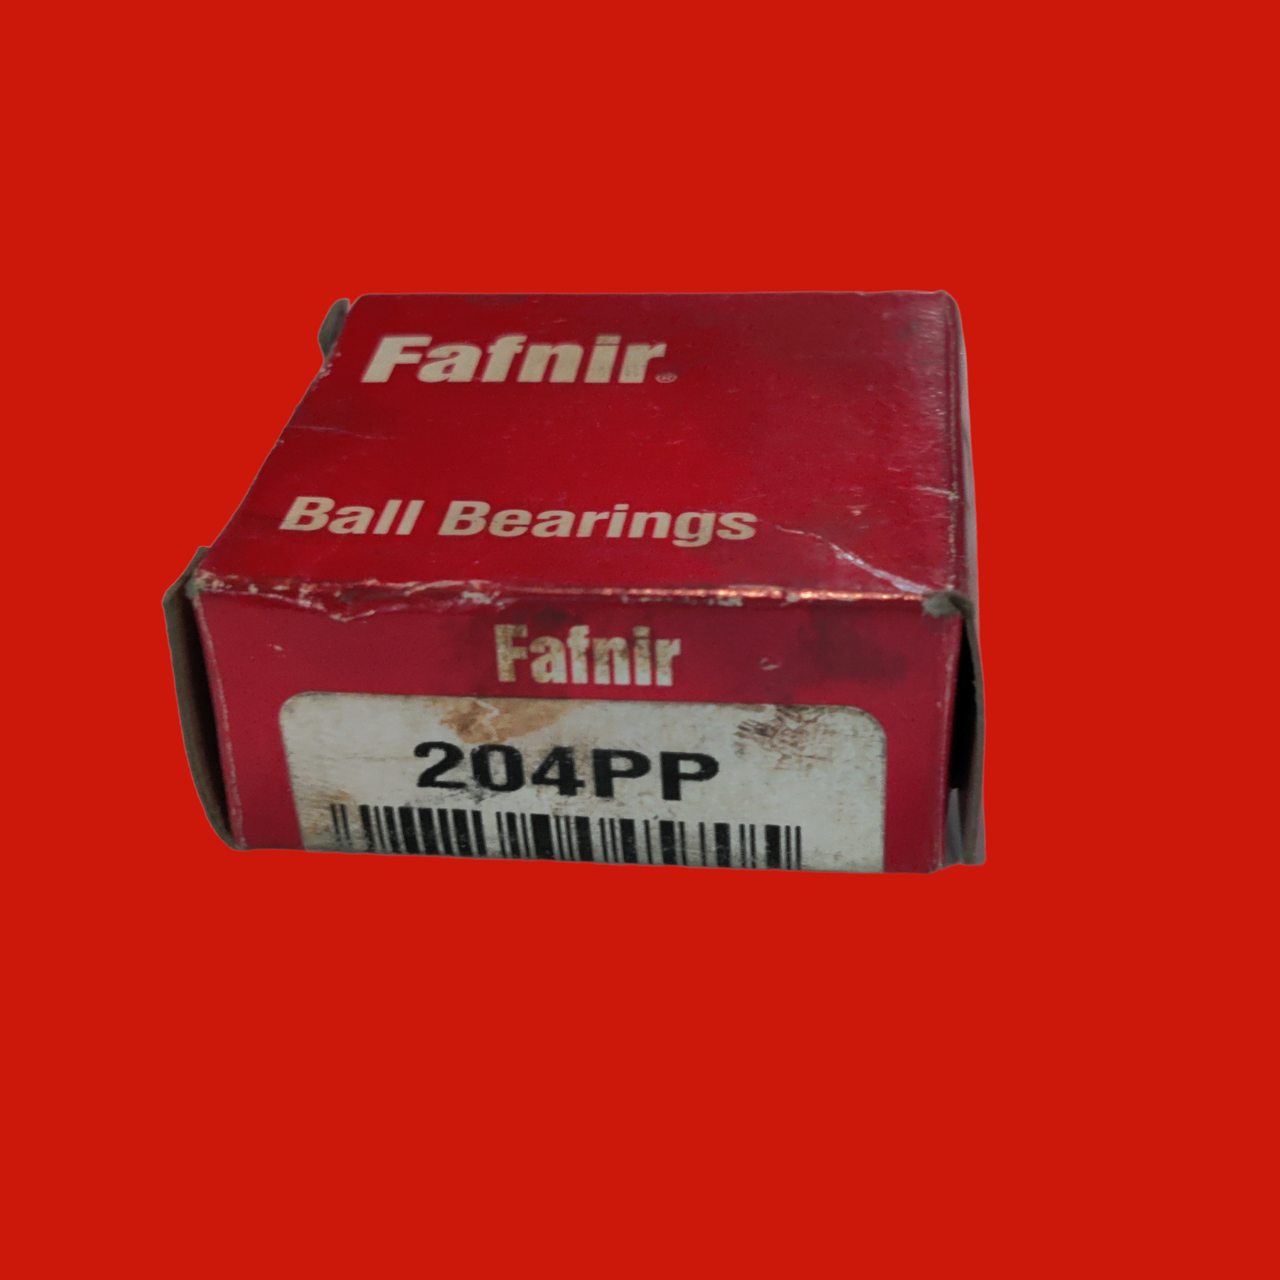 Fafnir 204PP Radial/Deep Groove Ball Bearing - Round Bore, 20 mm ID, 47 mm OD, 0.5512 in Width, Double Sealed, P Internal Clearance